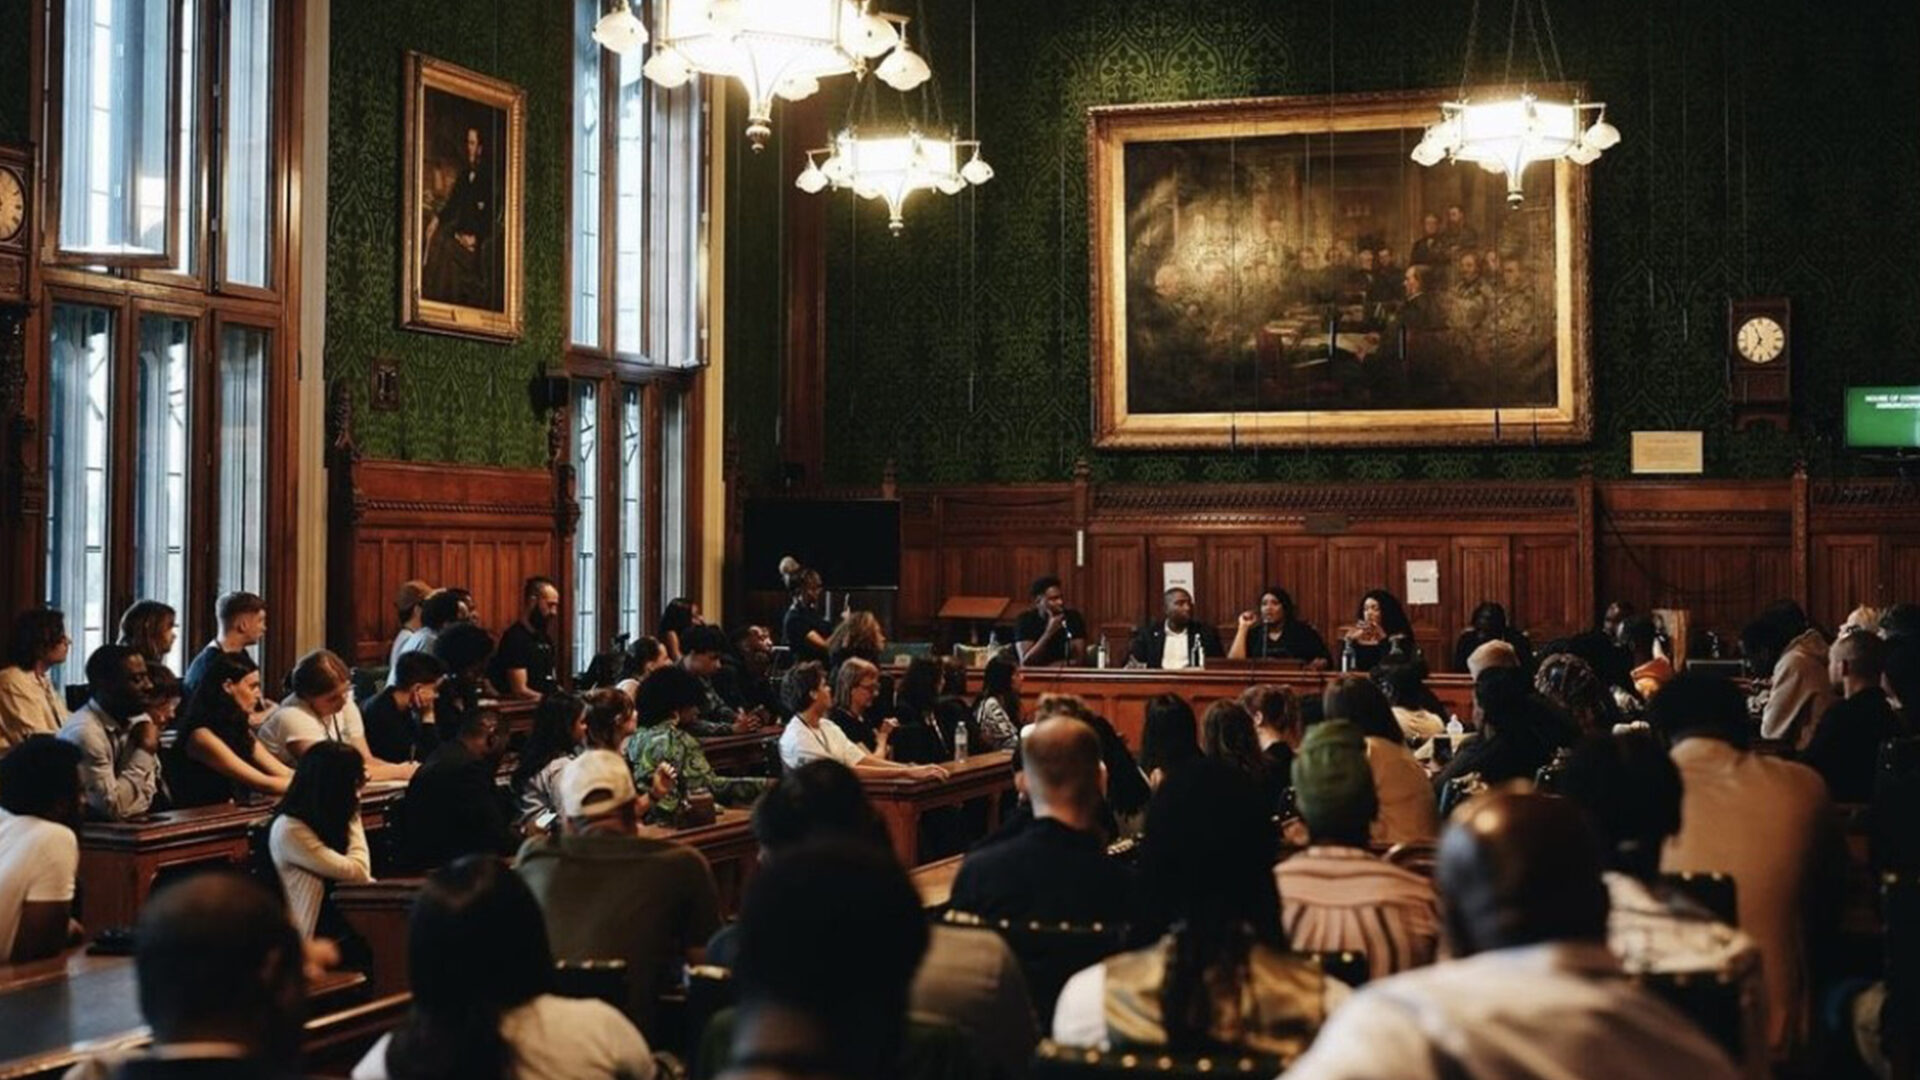 Our trapping movie panel discussion at the houses of parliament